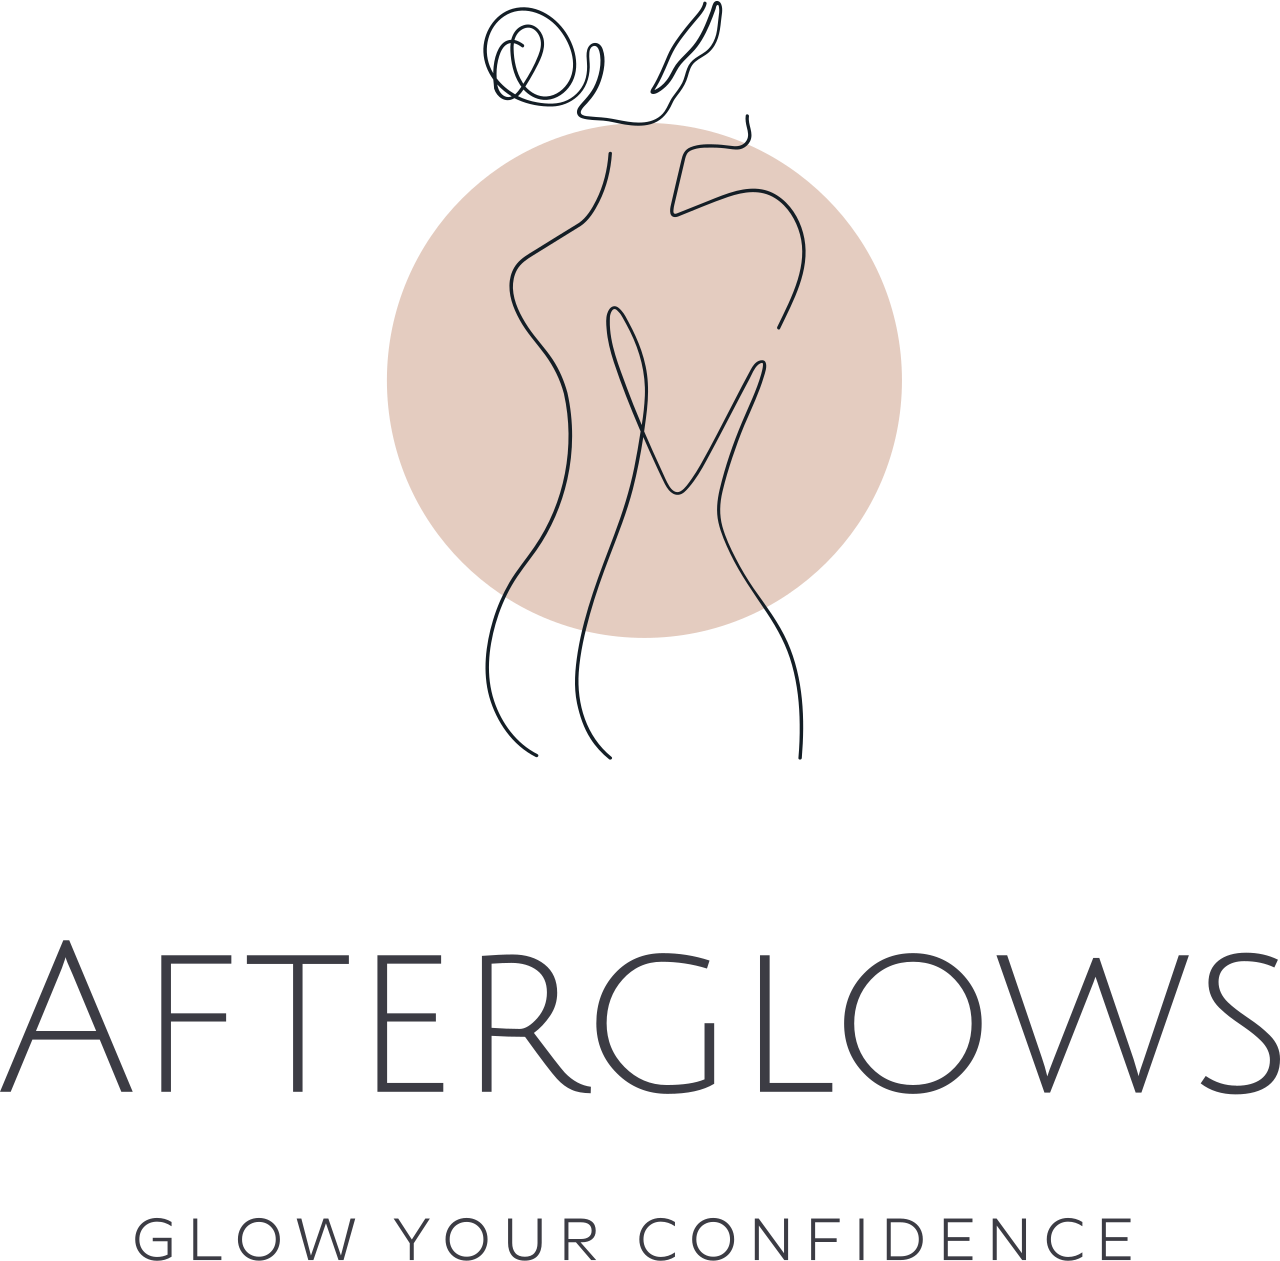 Afterglows's logo